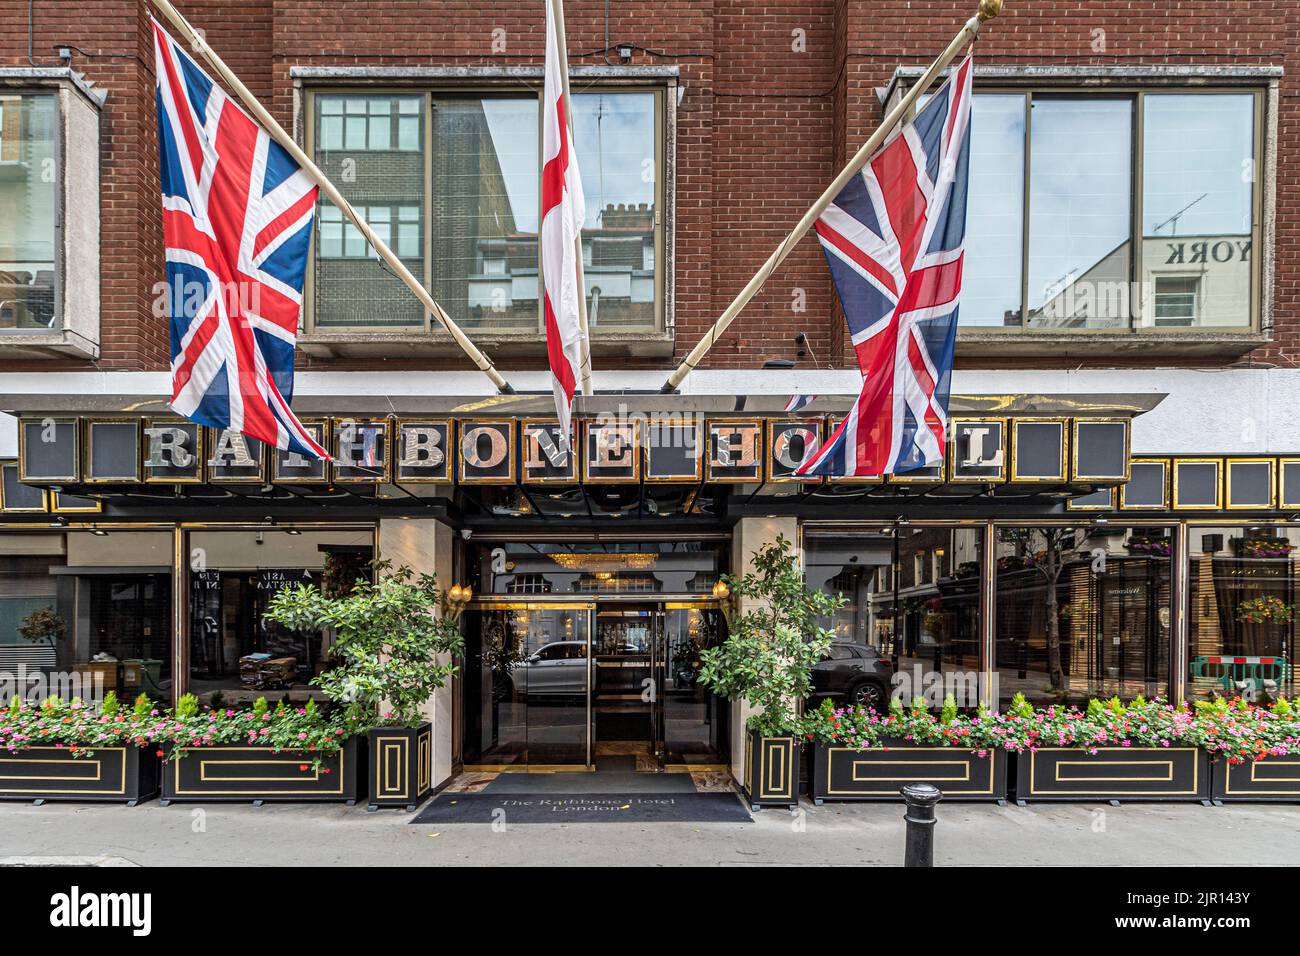 Union Flags displayed outside the front entrance to The Rathbone Hotel an intimate, boutique style hotel on Rathbone St in Fitzrovia , London W1 Stock Photo